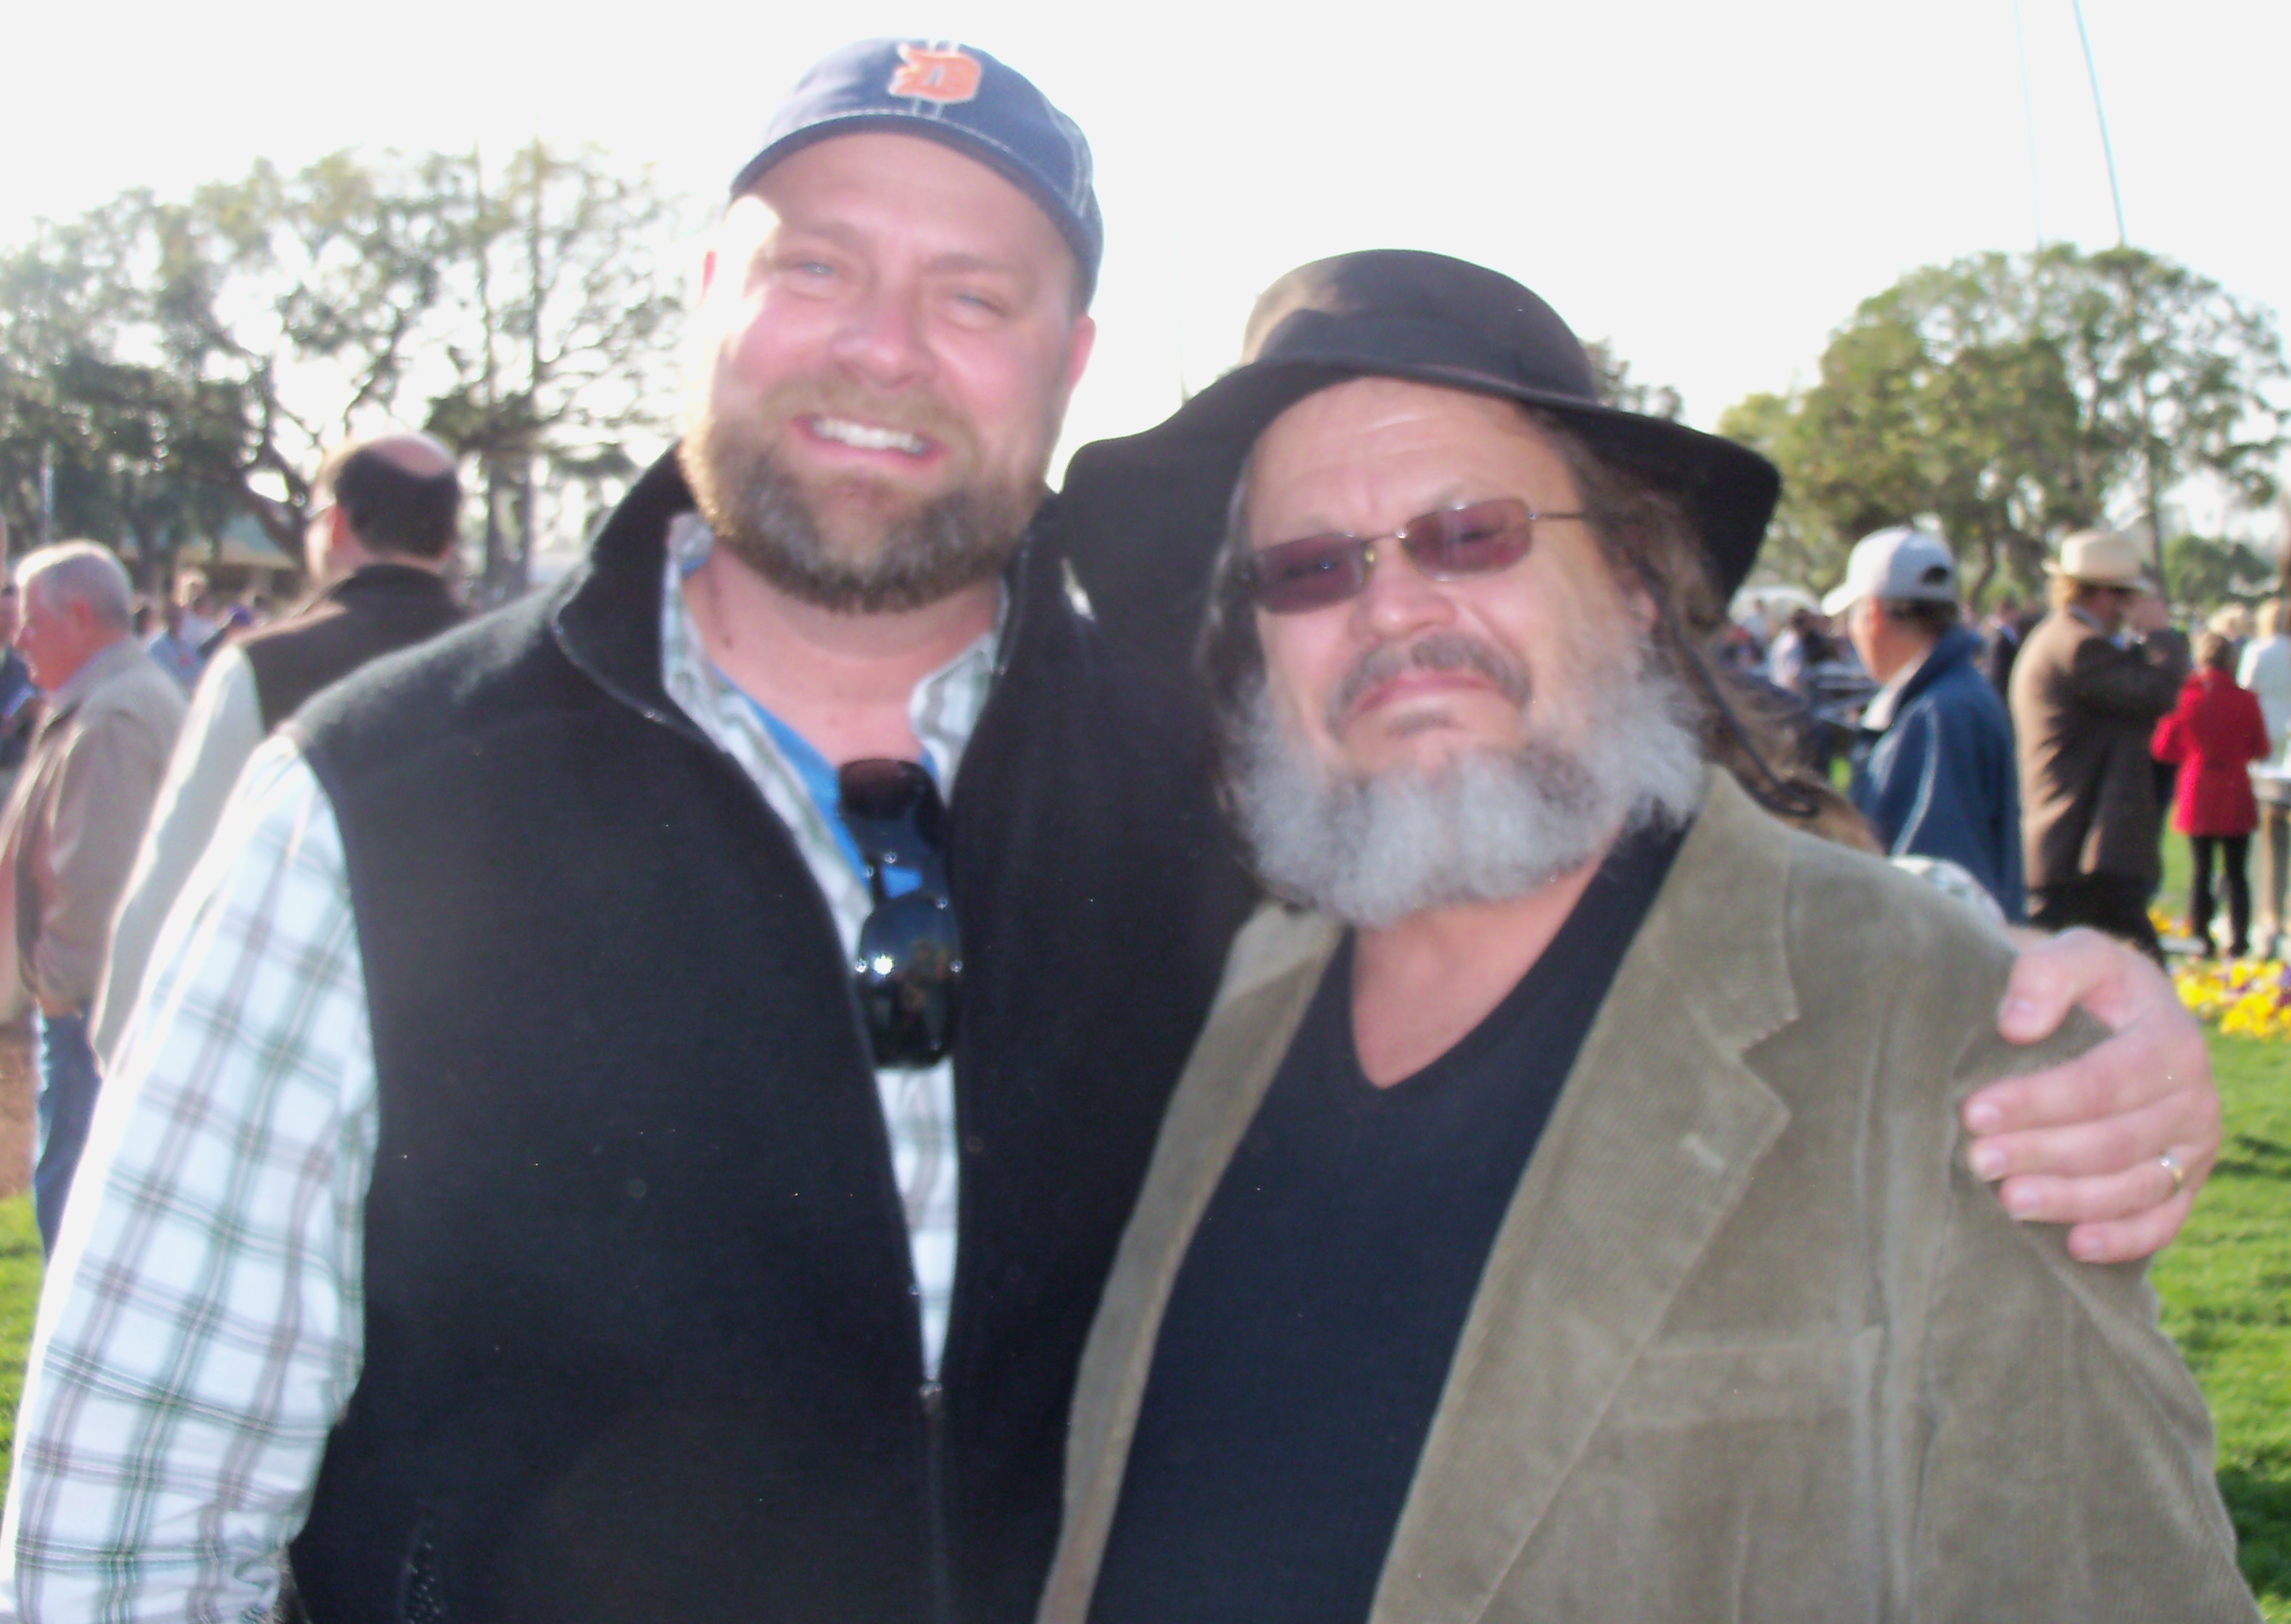 DOUG O'NEILL (trainer of I'LL HAVE ANOTHER, winner of the 2012 Kentucky Derby & Preakness) and actor DELL YOUNT - 